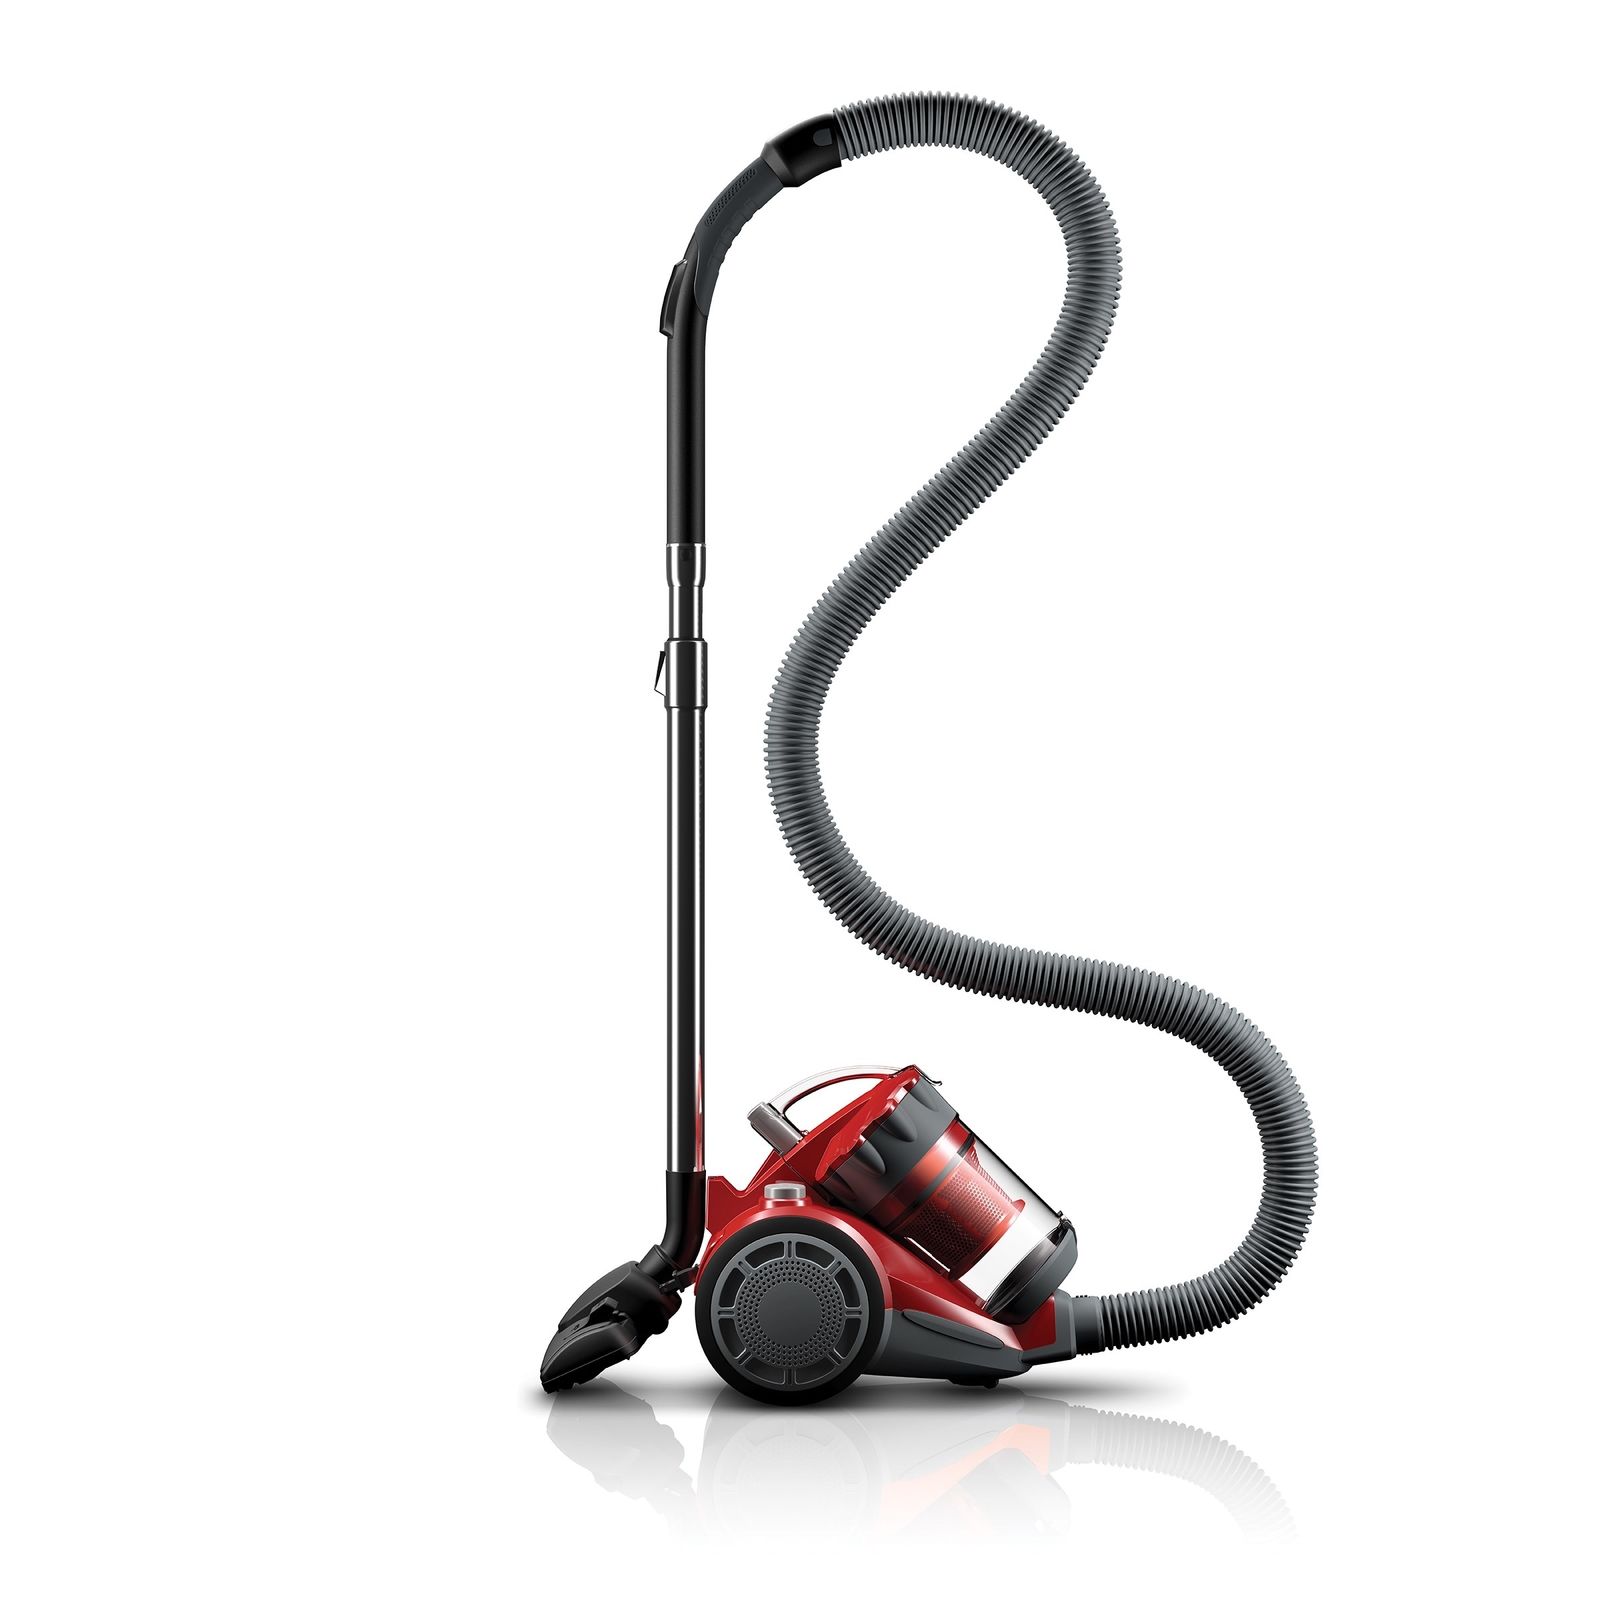 Dirt Devil Featherlite Cyclonic Canister Vacuum Just $28.89!